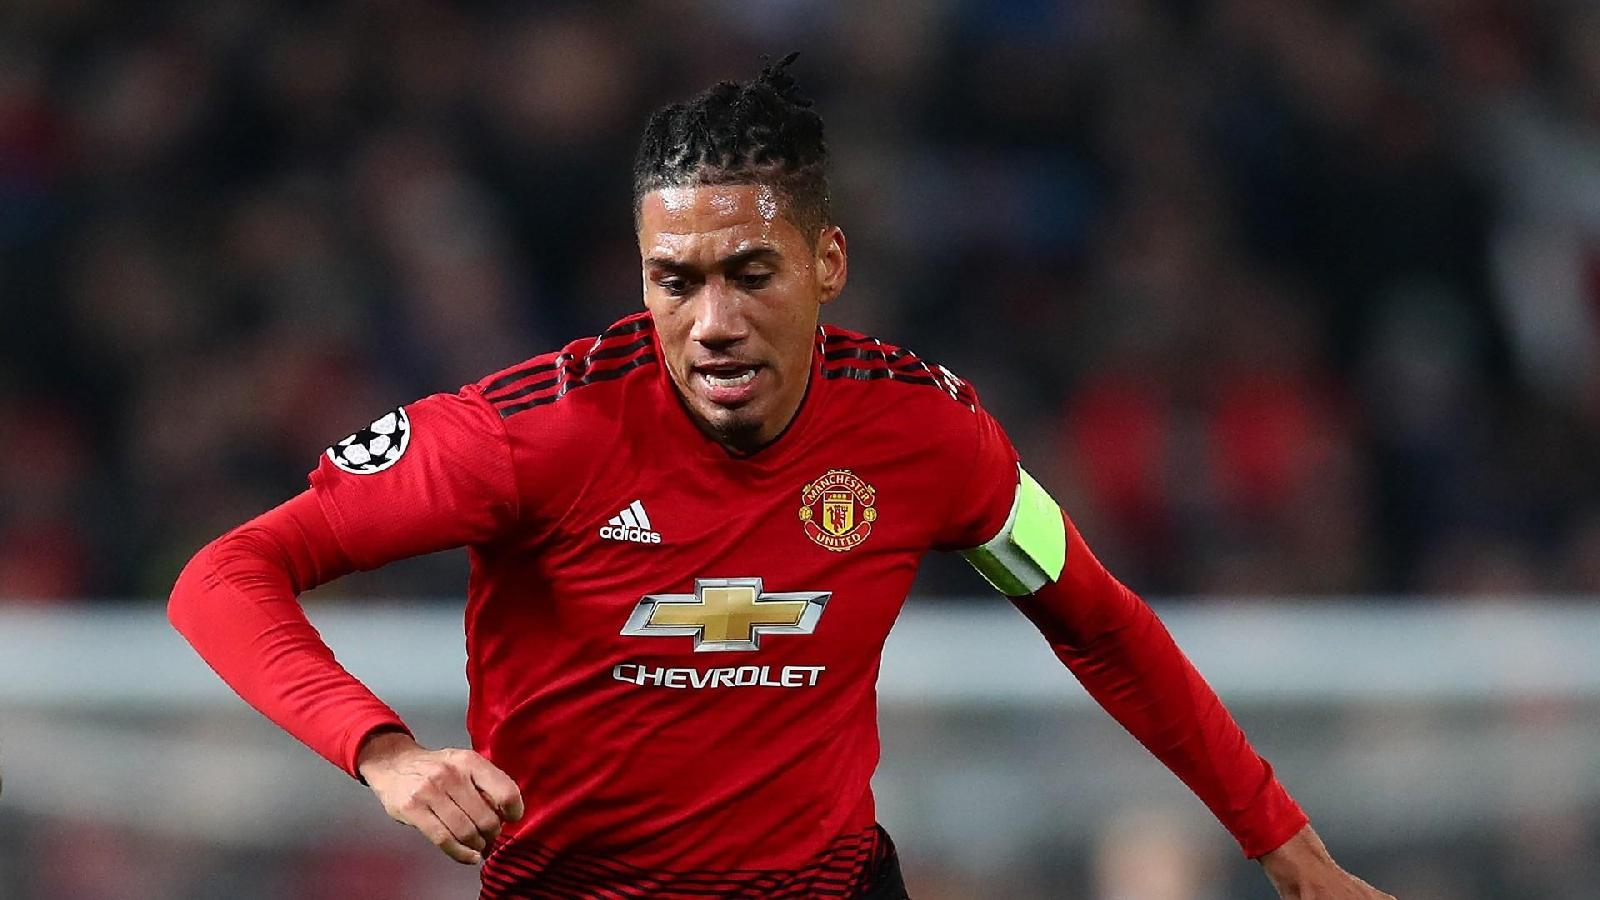 Chris Smalling arriva dal Manchester United